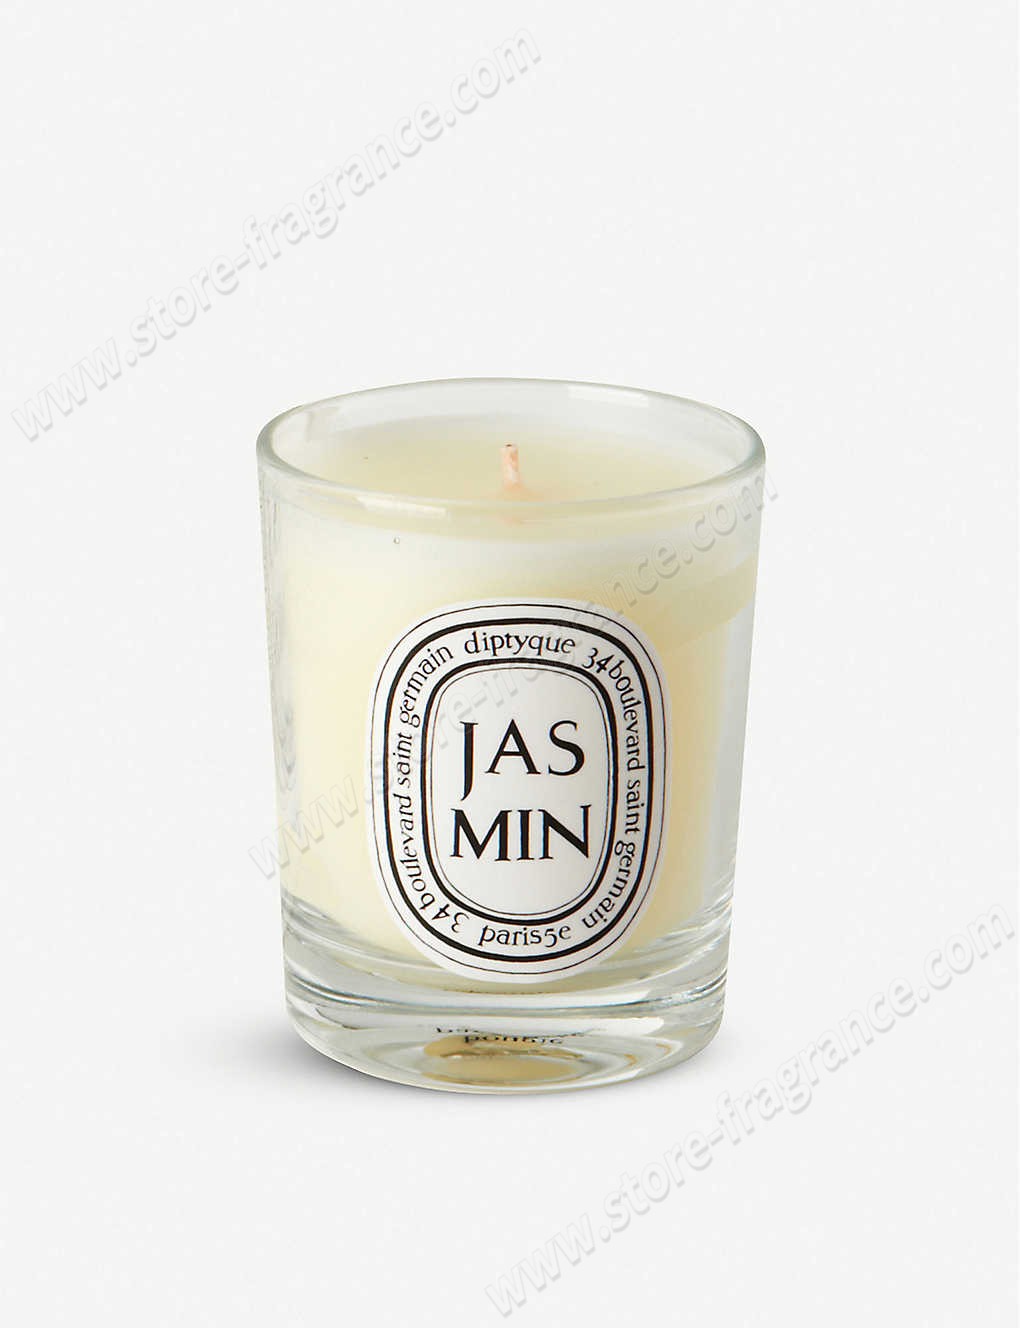 DIPTYQUE/Jasmin mini scented candle ✿ Discount Store - DIPTYQUE/Jasmin mini scented candle ✿ Discount Store